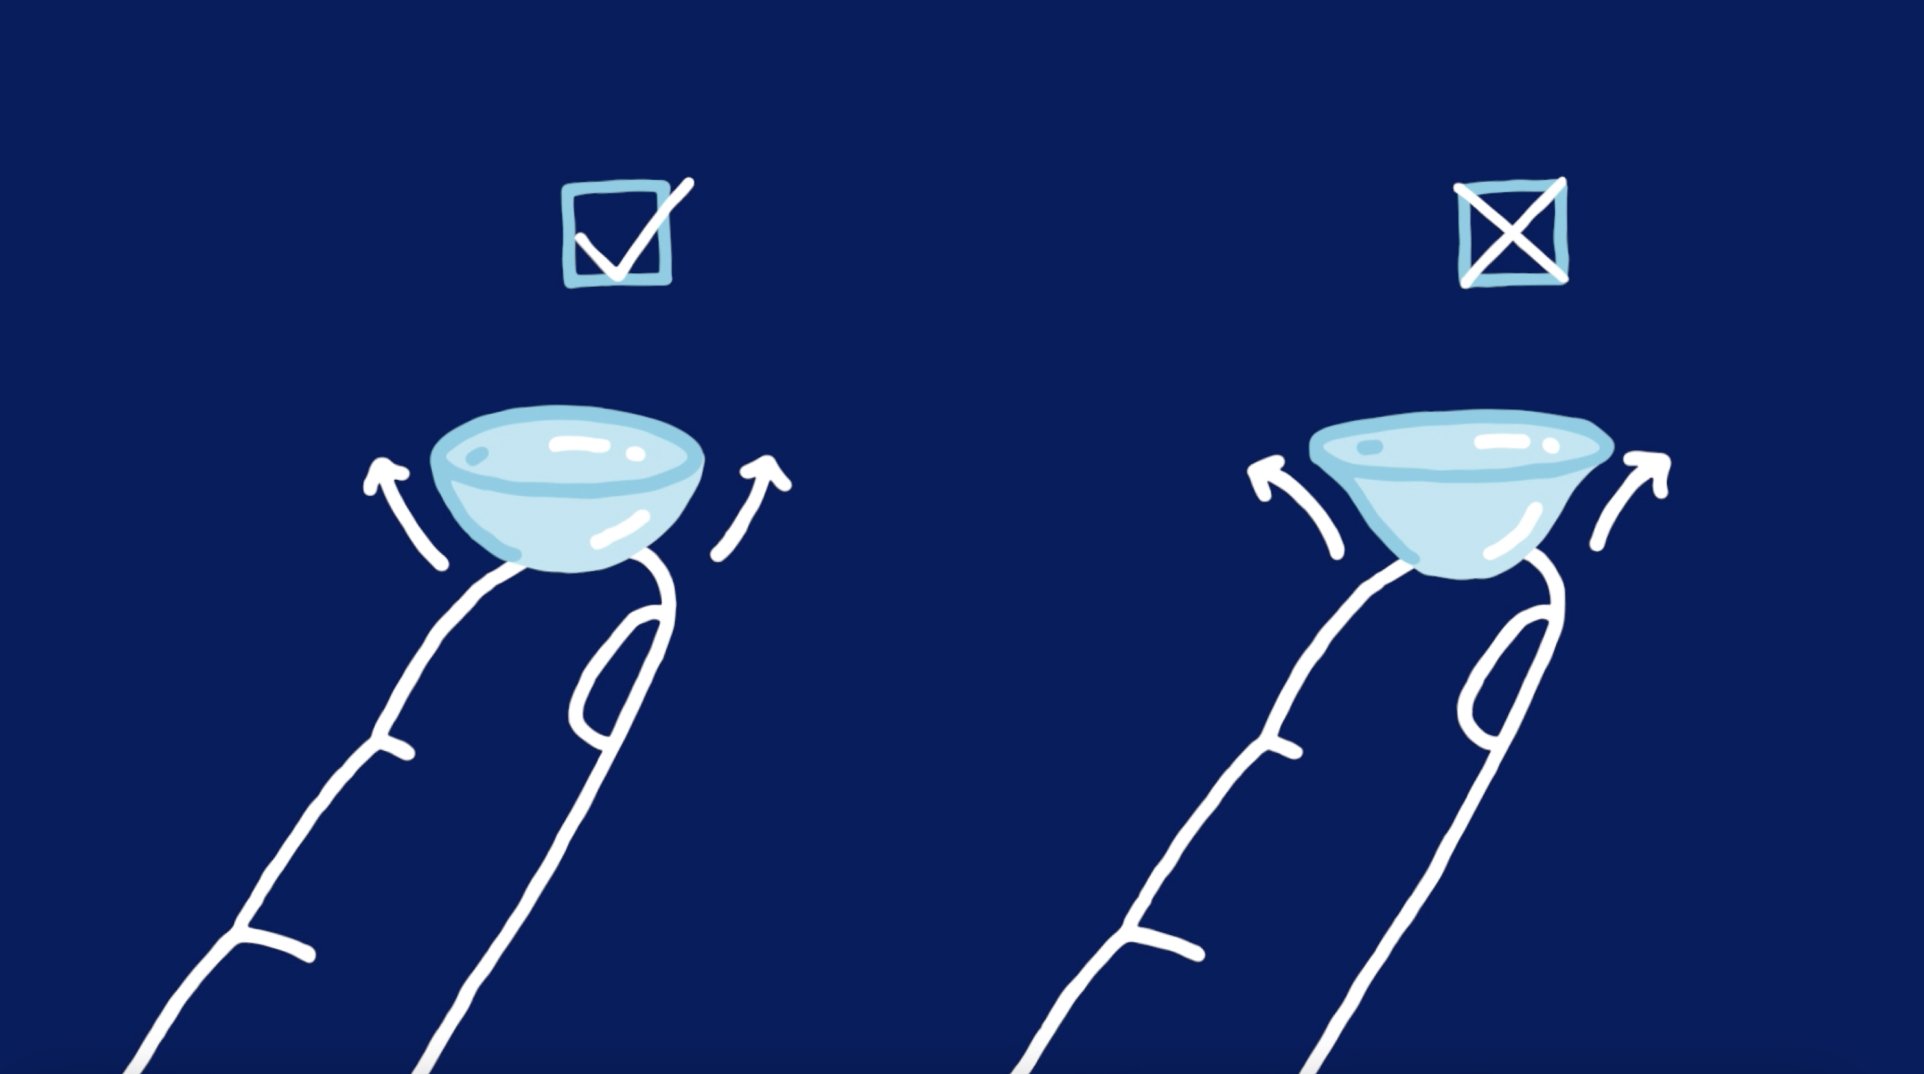 Illustration showing how to check if your contact is inside out using the side view method